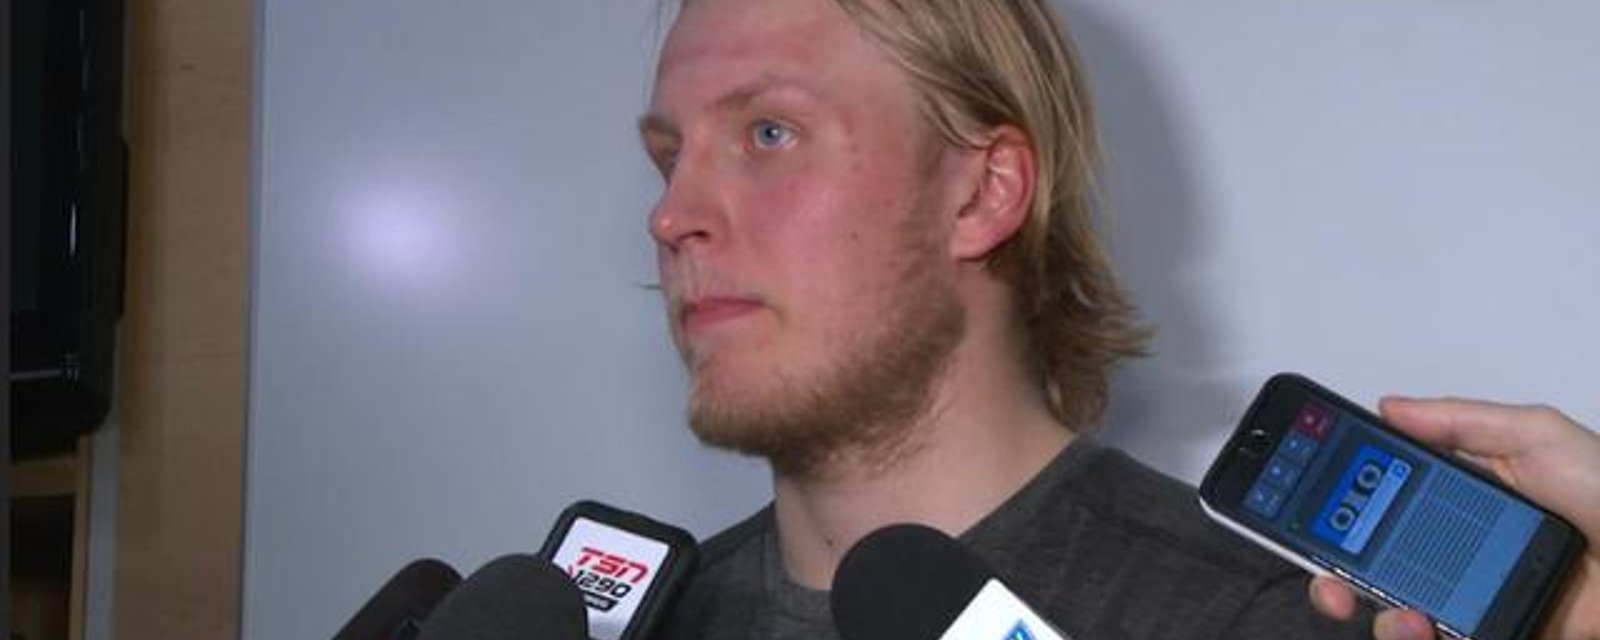 Laine finally opens up about getting benched by Torts in fourth game in Columbus